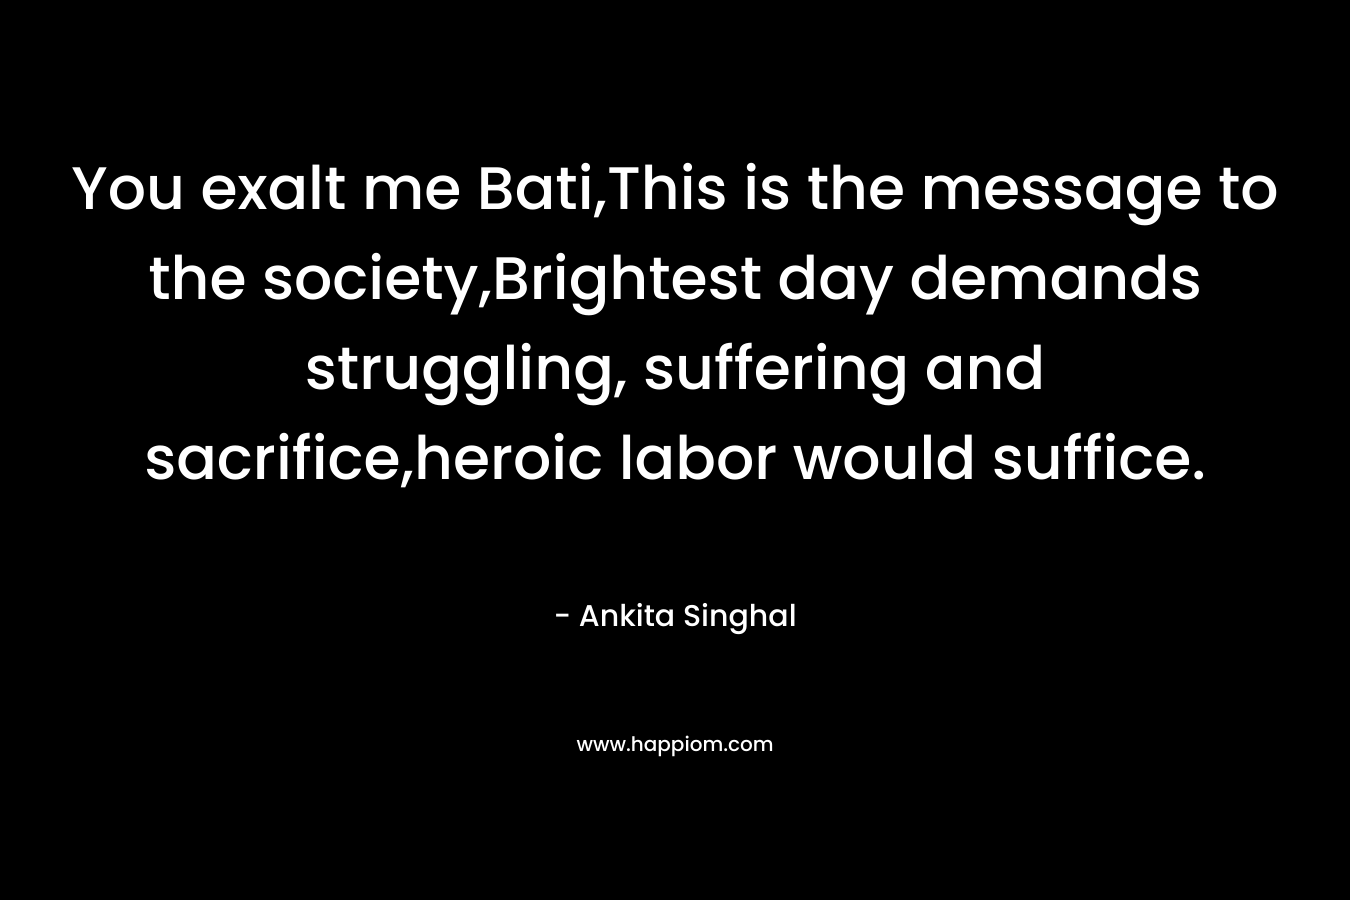 You exalt me Bati,This is the message to the society,Brightest day demands struggling, suffering and sacrifice,heroic labor would suffice.